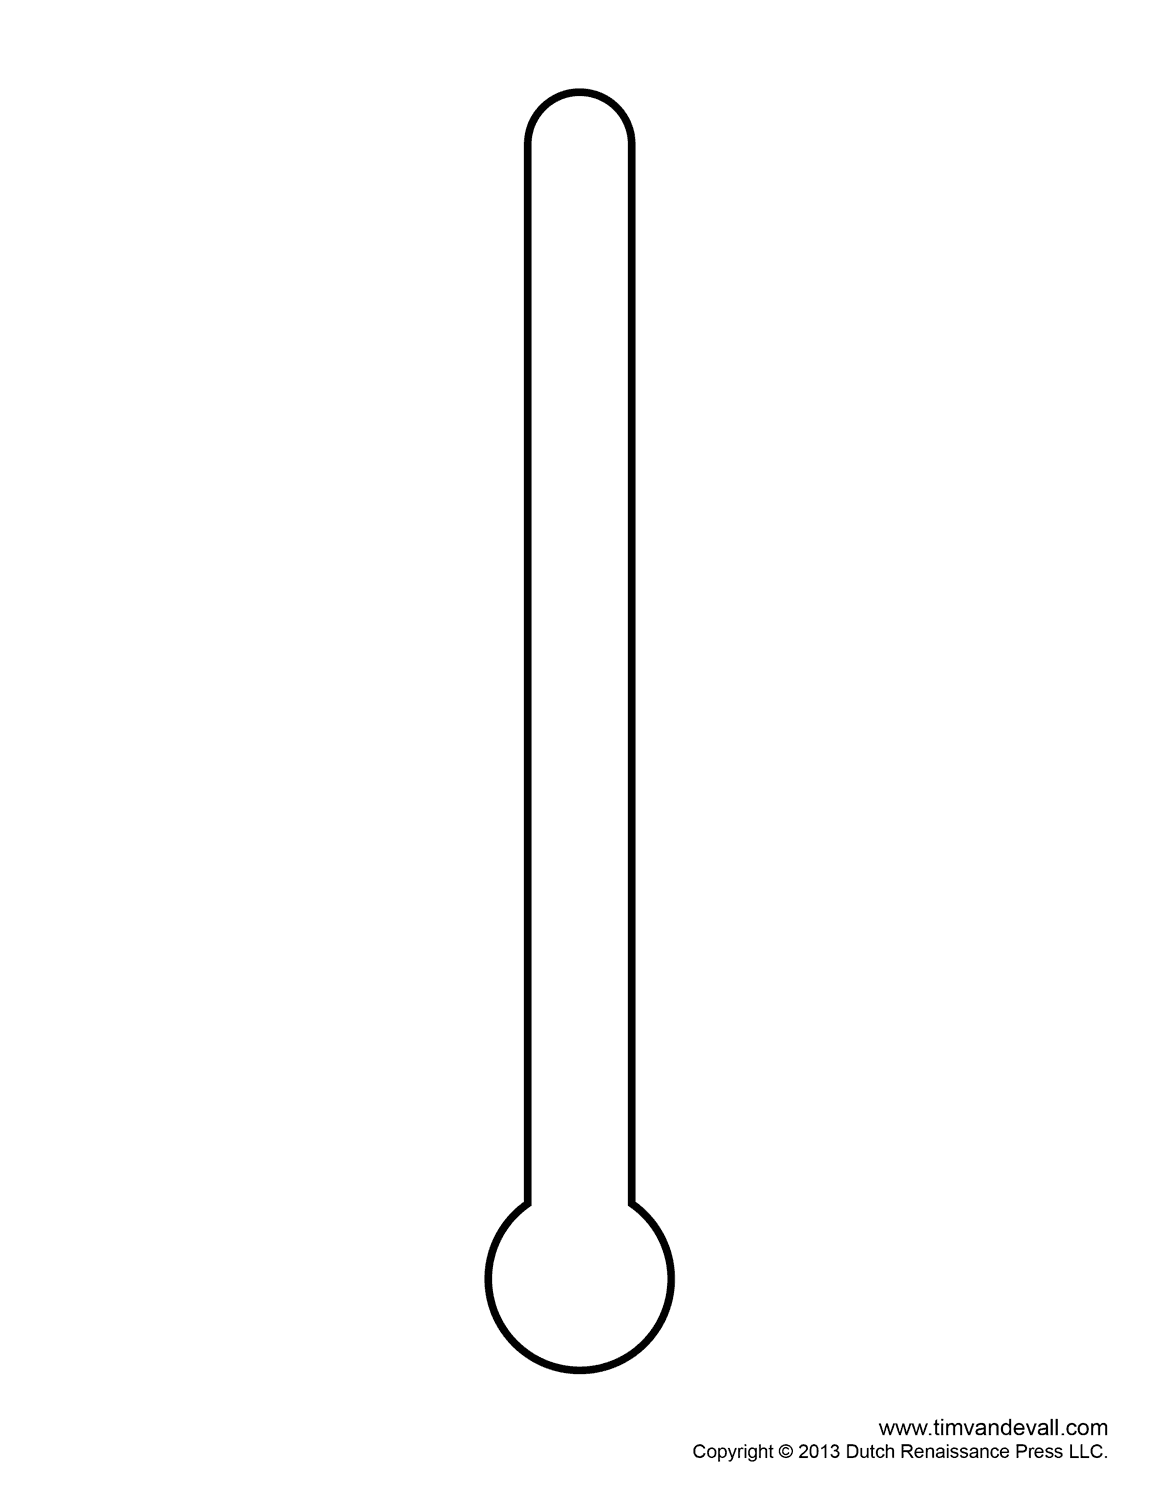 Thermometer clipart free 6 thermometer clip art 2